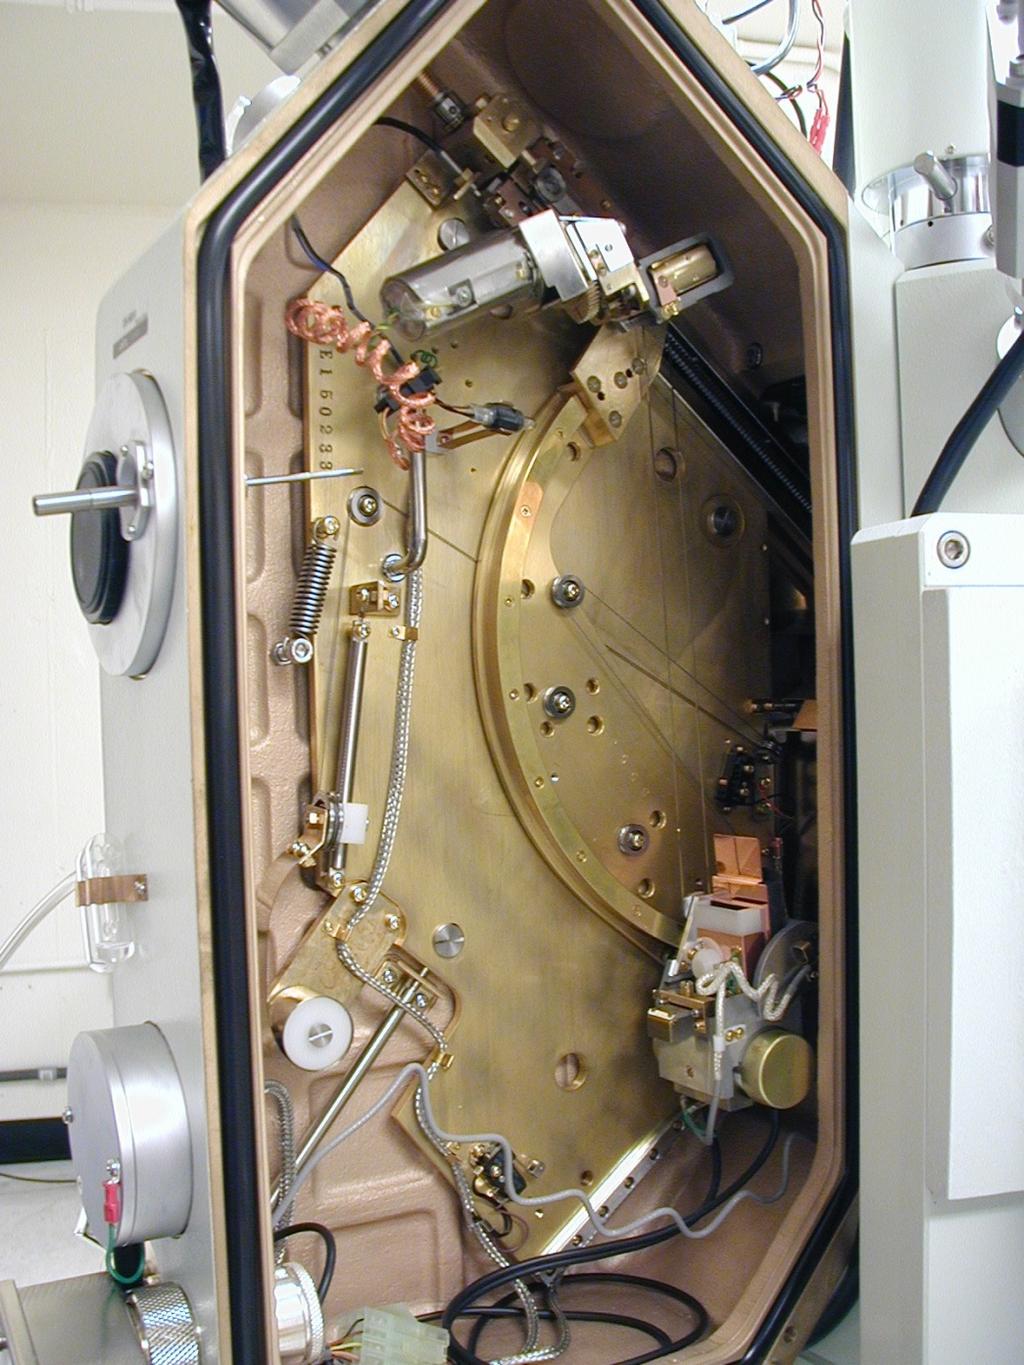 WDS Spectrometers An electron microprobe generally has 3-5 spectrometers, with 1-4 crystals in each.